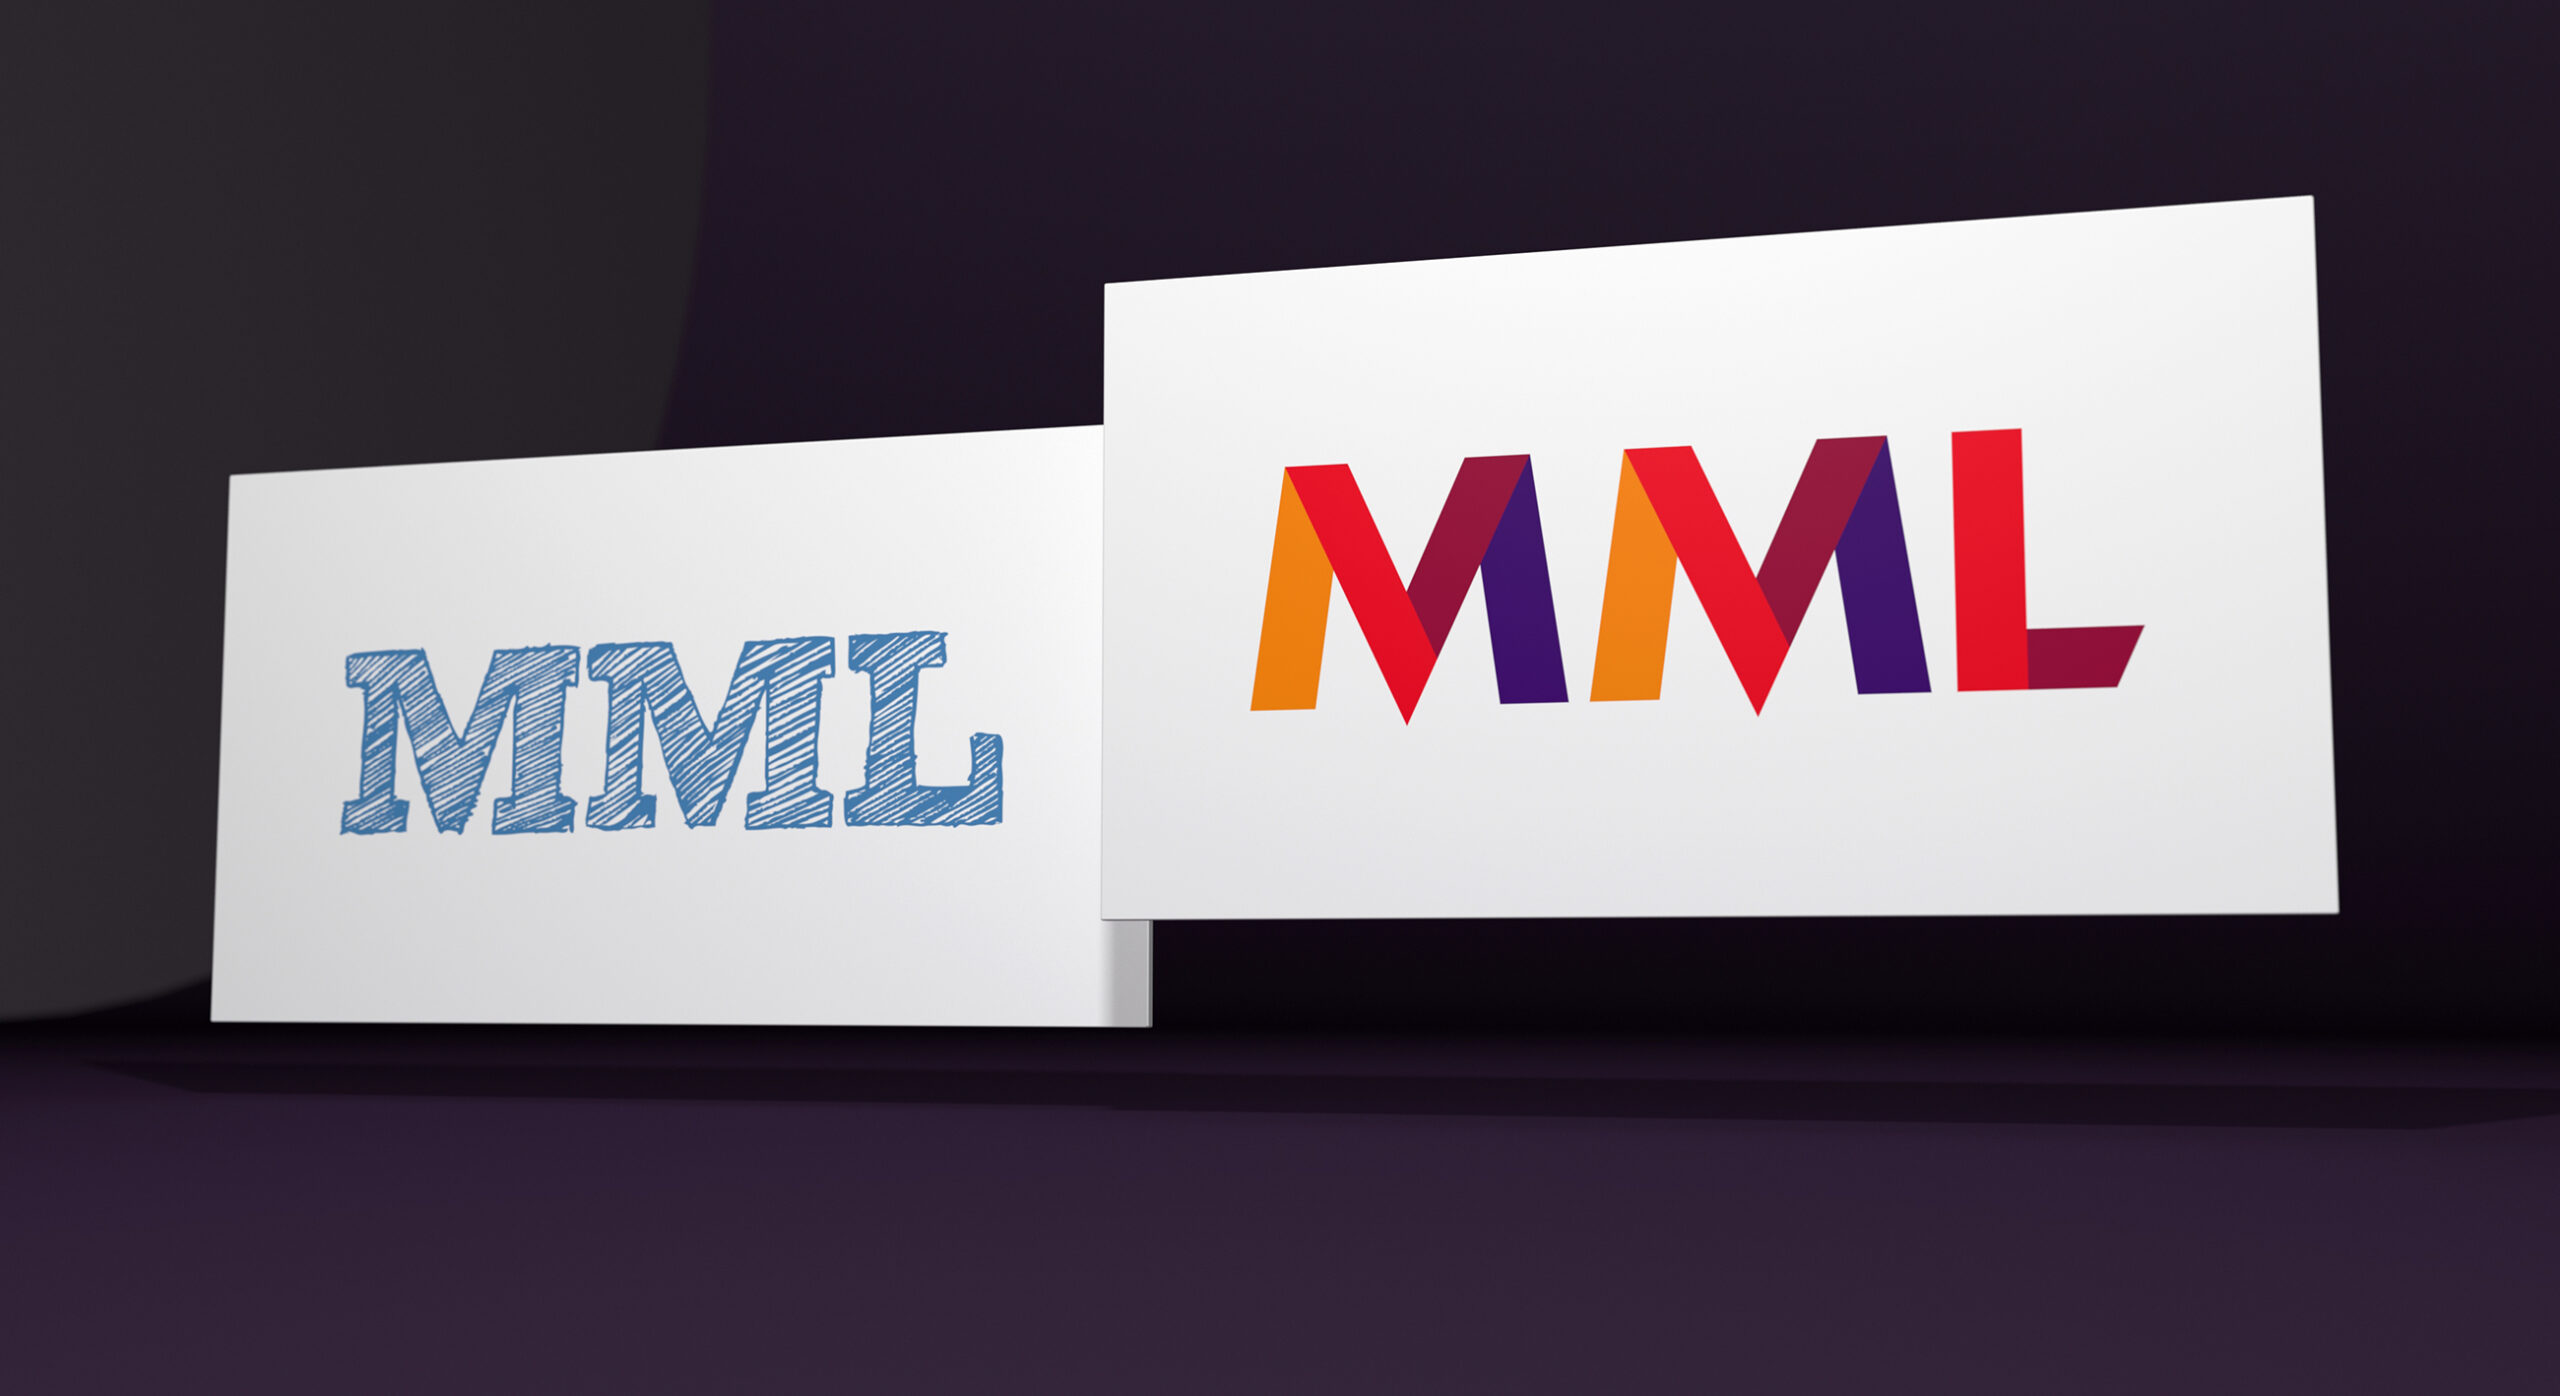 The MML business had evolved so much since the previous brand development. We created a more mature and slick position, yet sought to embody it with a bright tone.